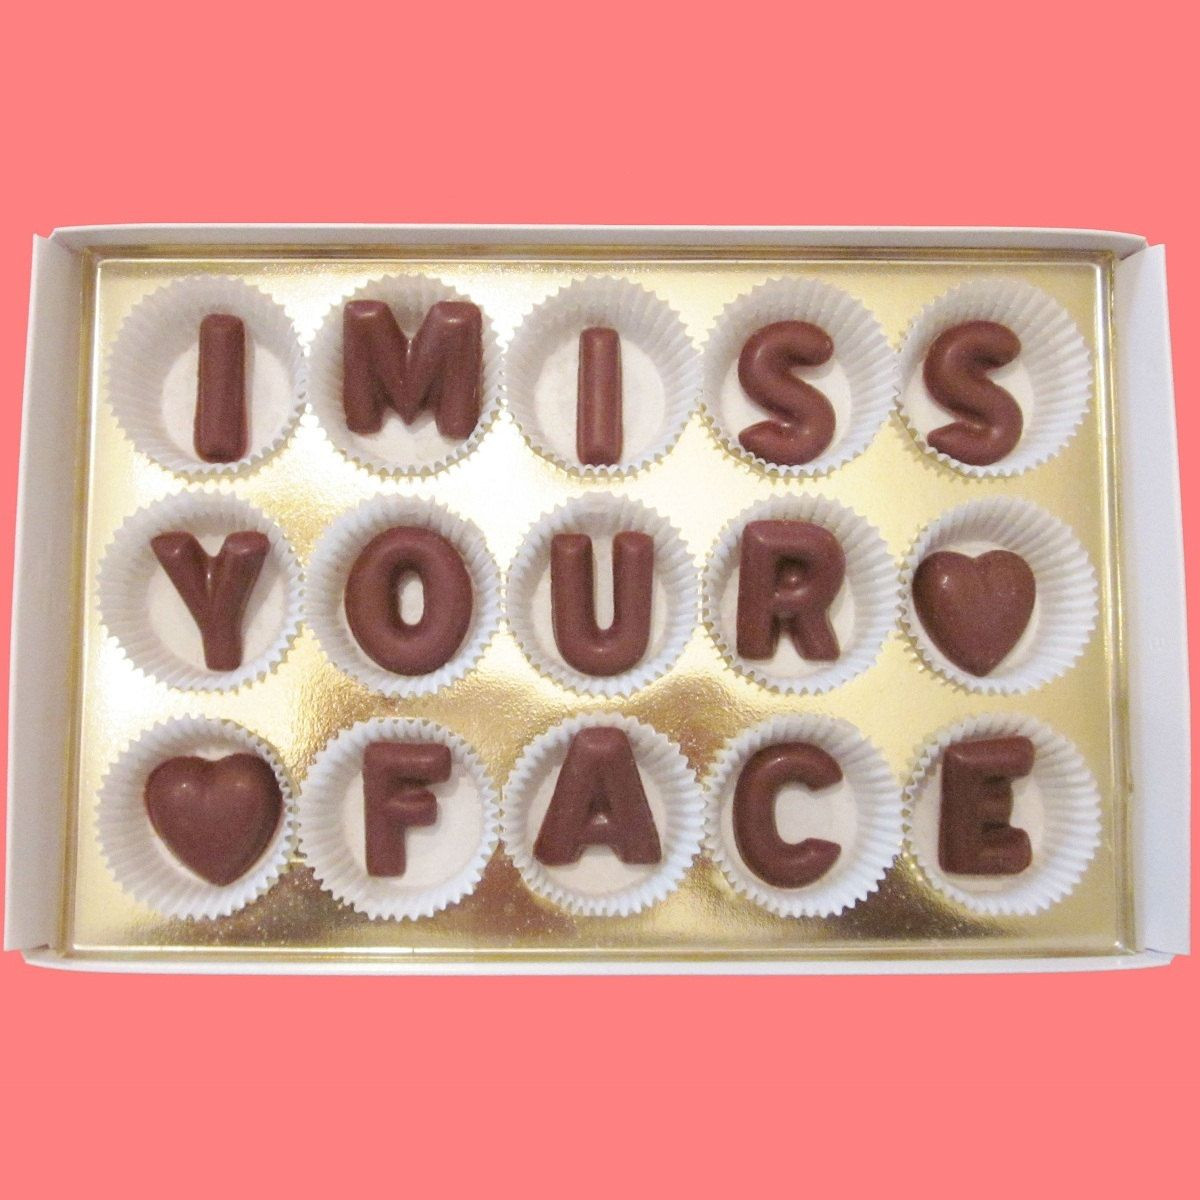 Valentines Day Ideas For Her Long Distance
 I Miss Your Face Chocolate Letters Long Distance